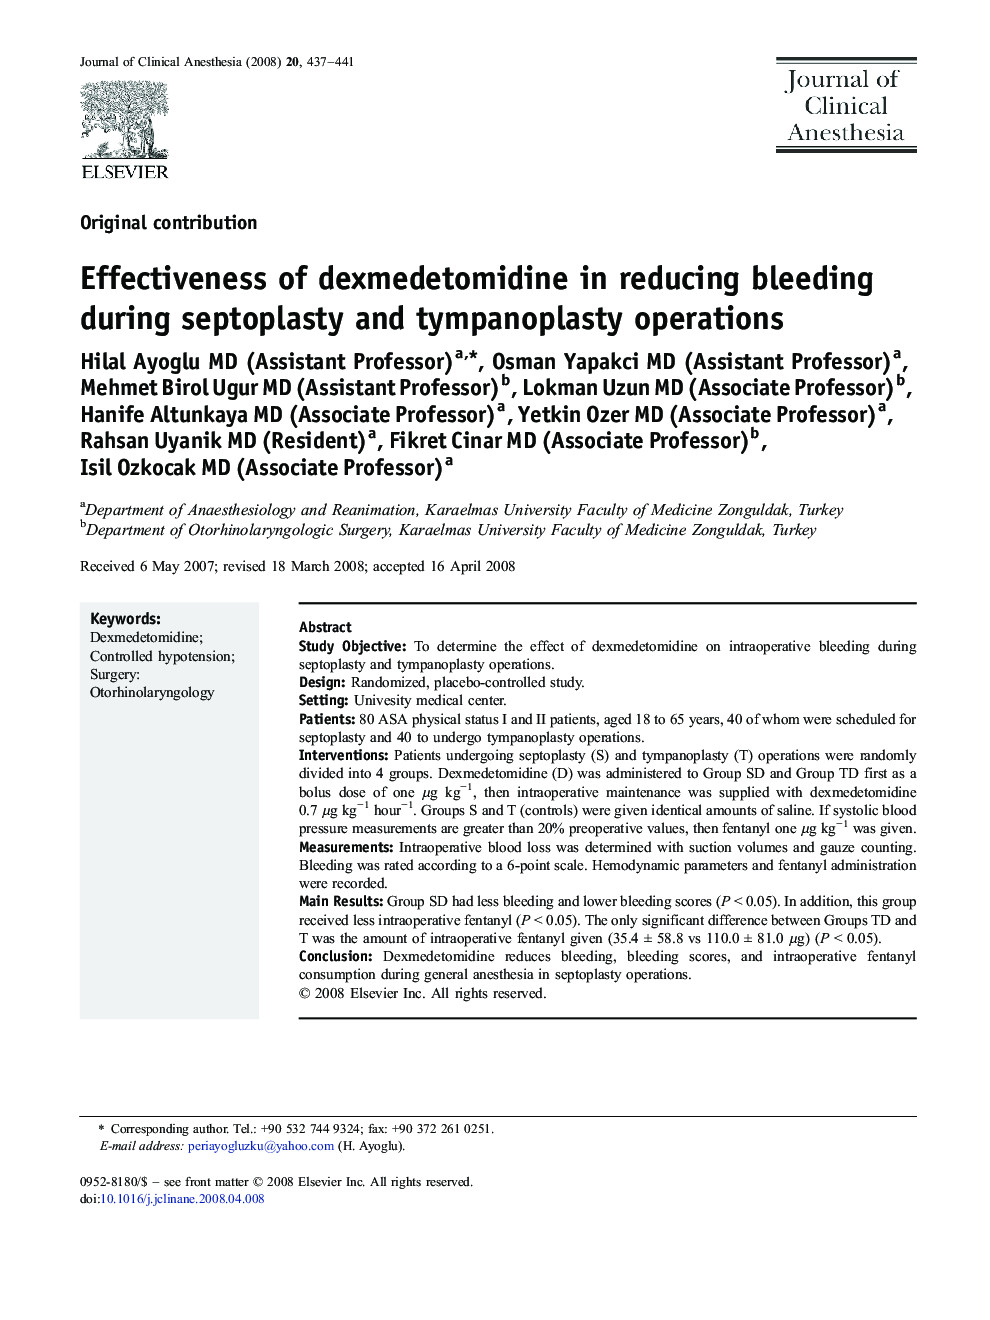 Effectiveness of dexmedetomidine in reducing bleeding during septoplasty and tympanoplasty operations